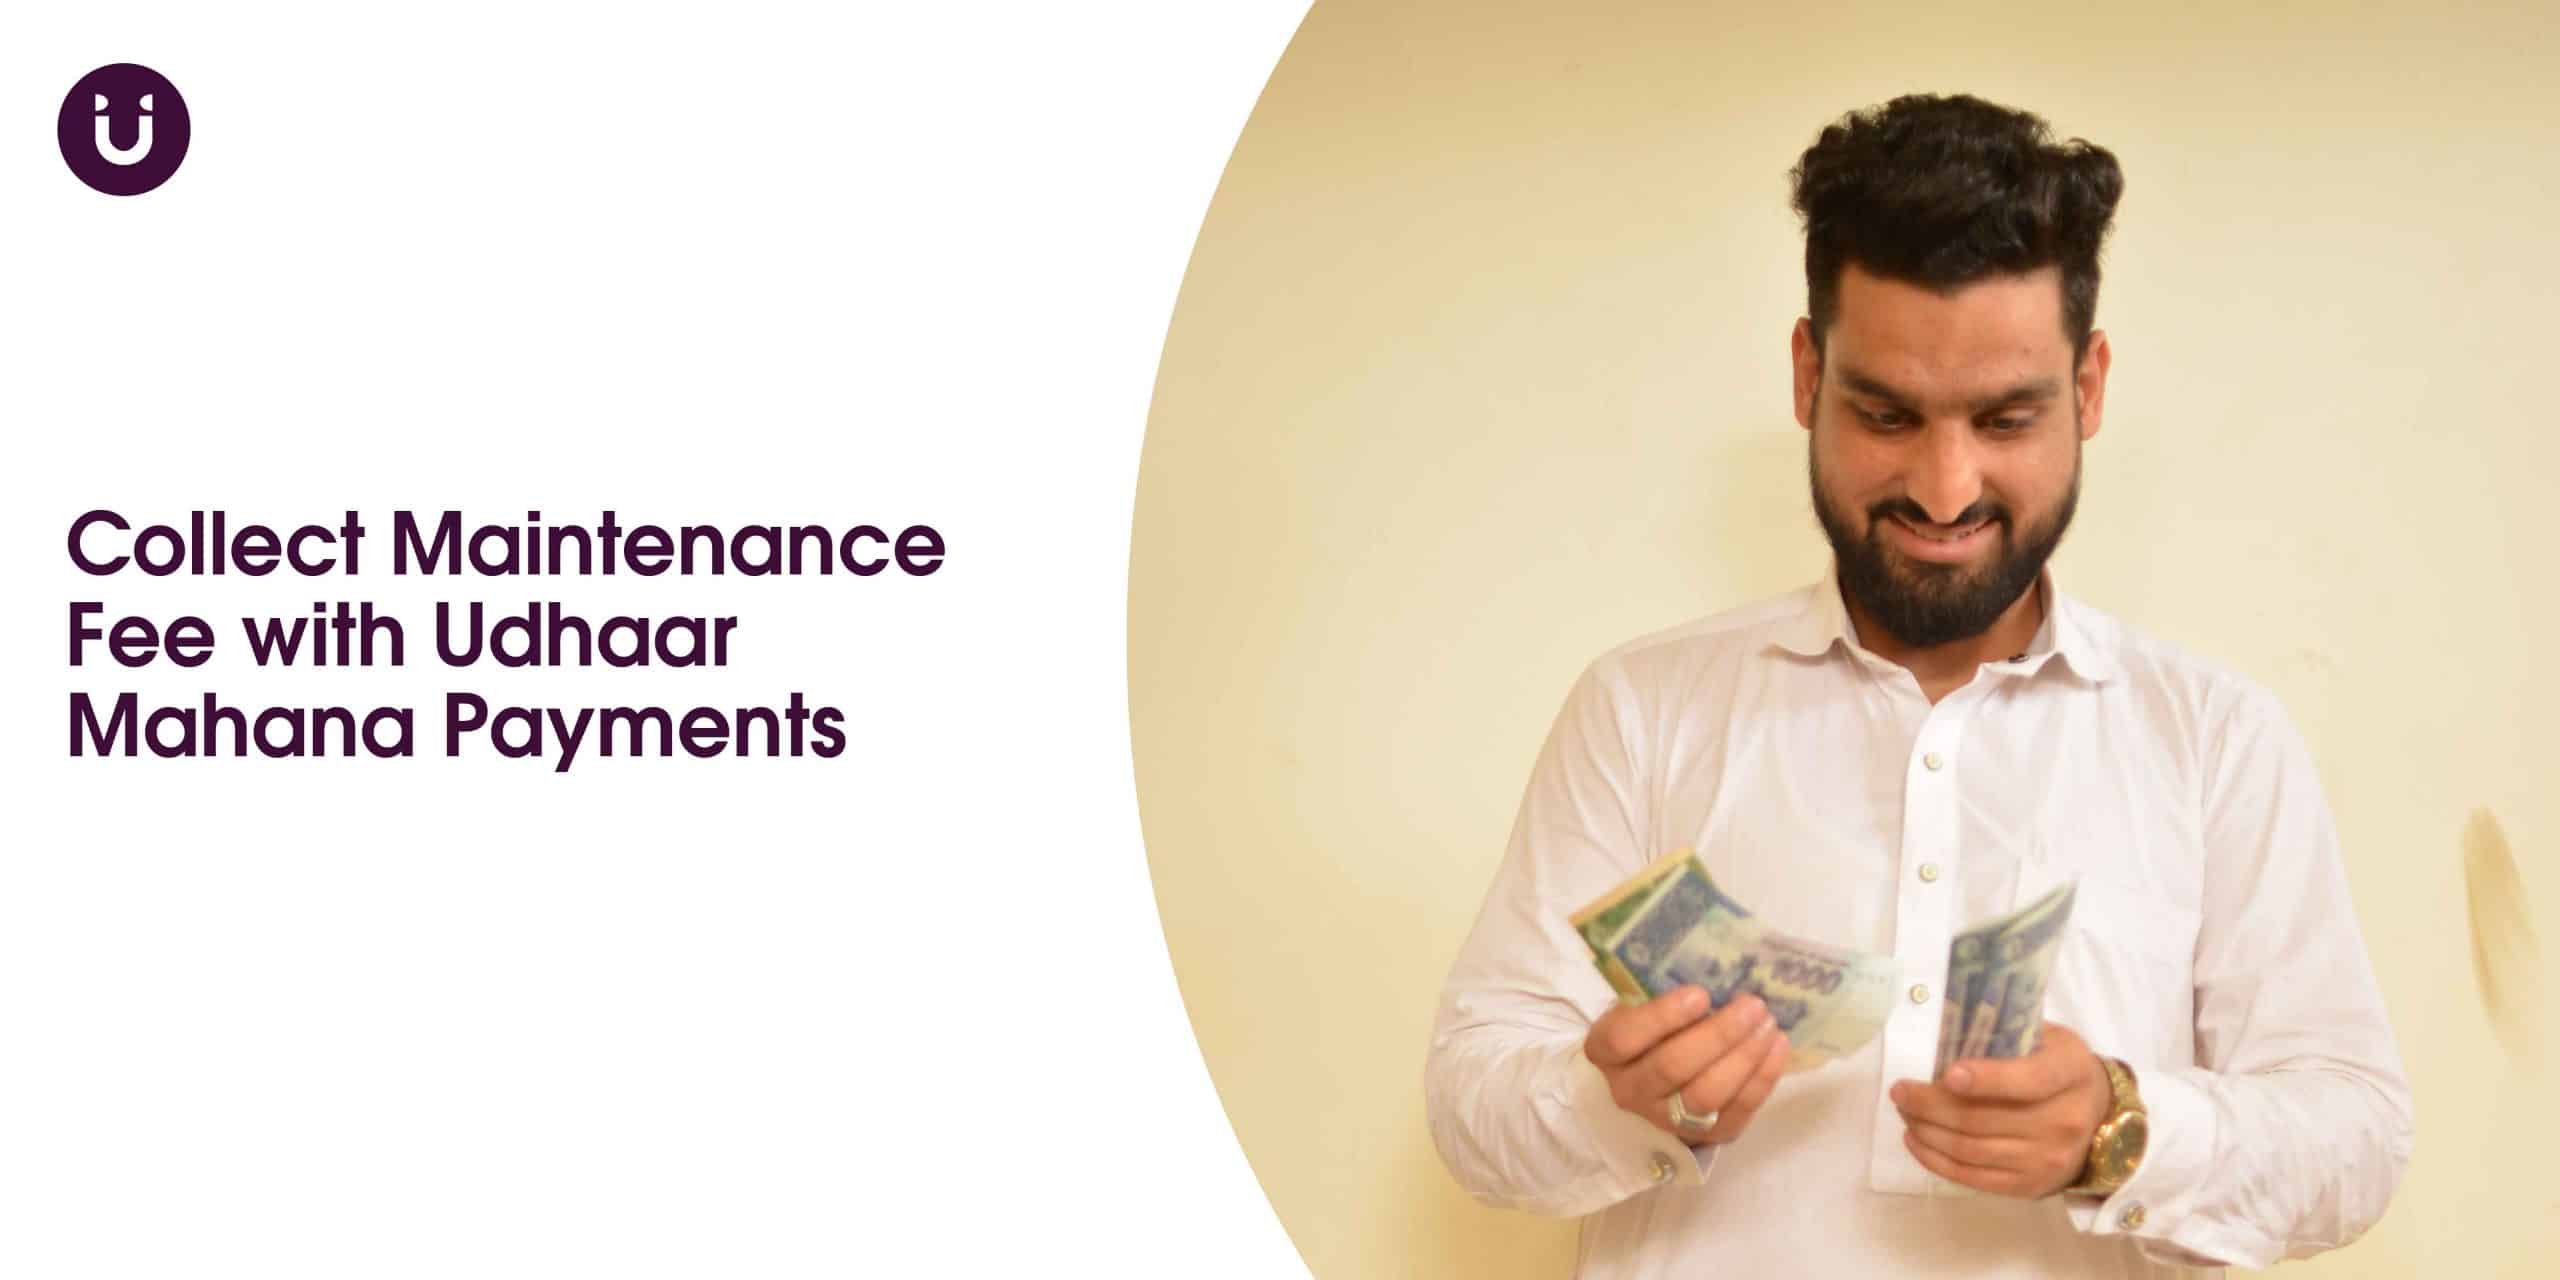 Collect Maintenance Fee with Udhaar Mahana Payments